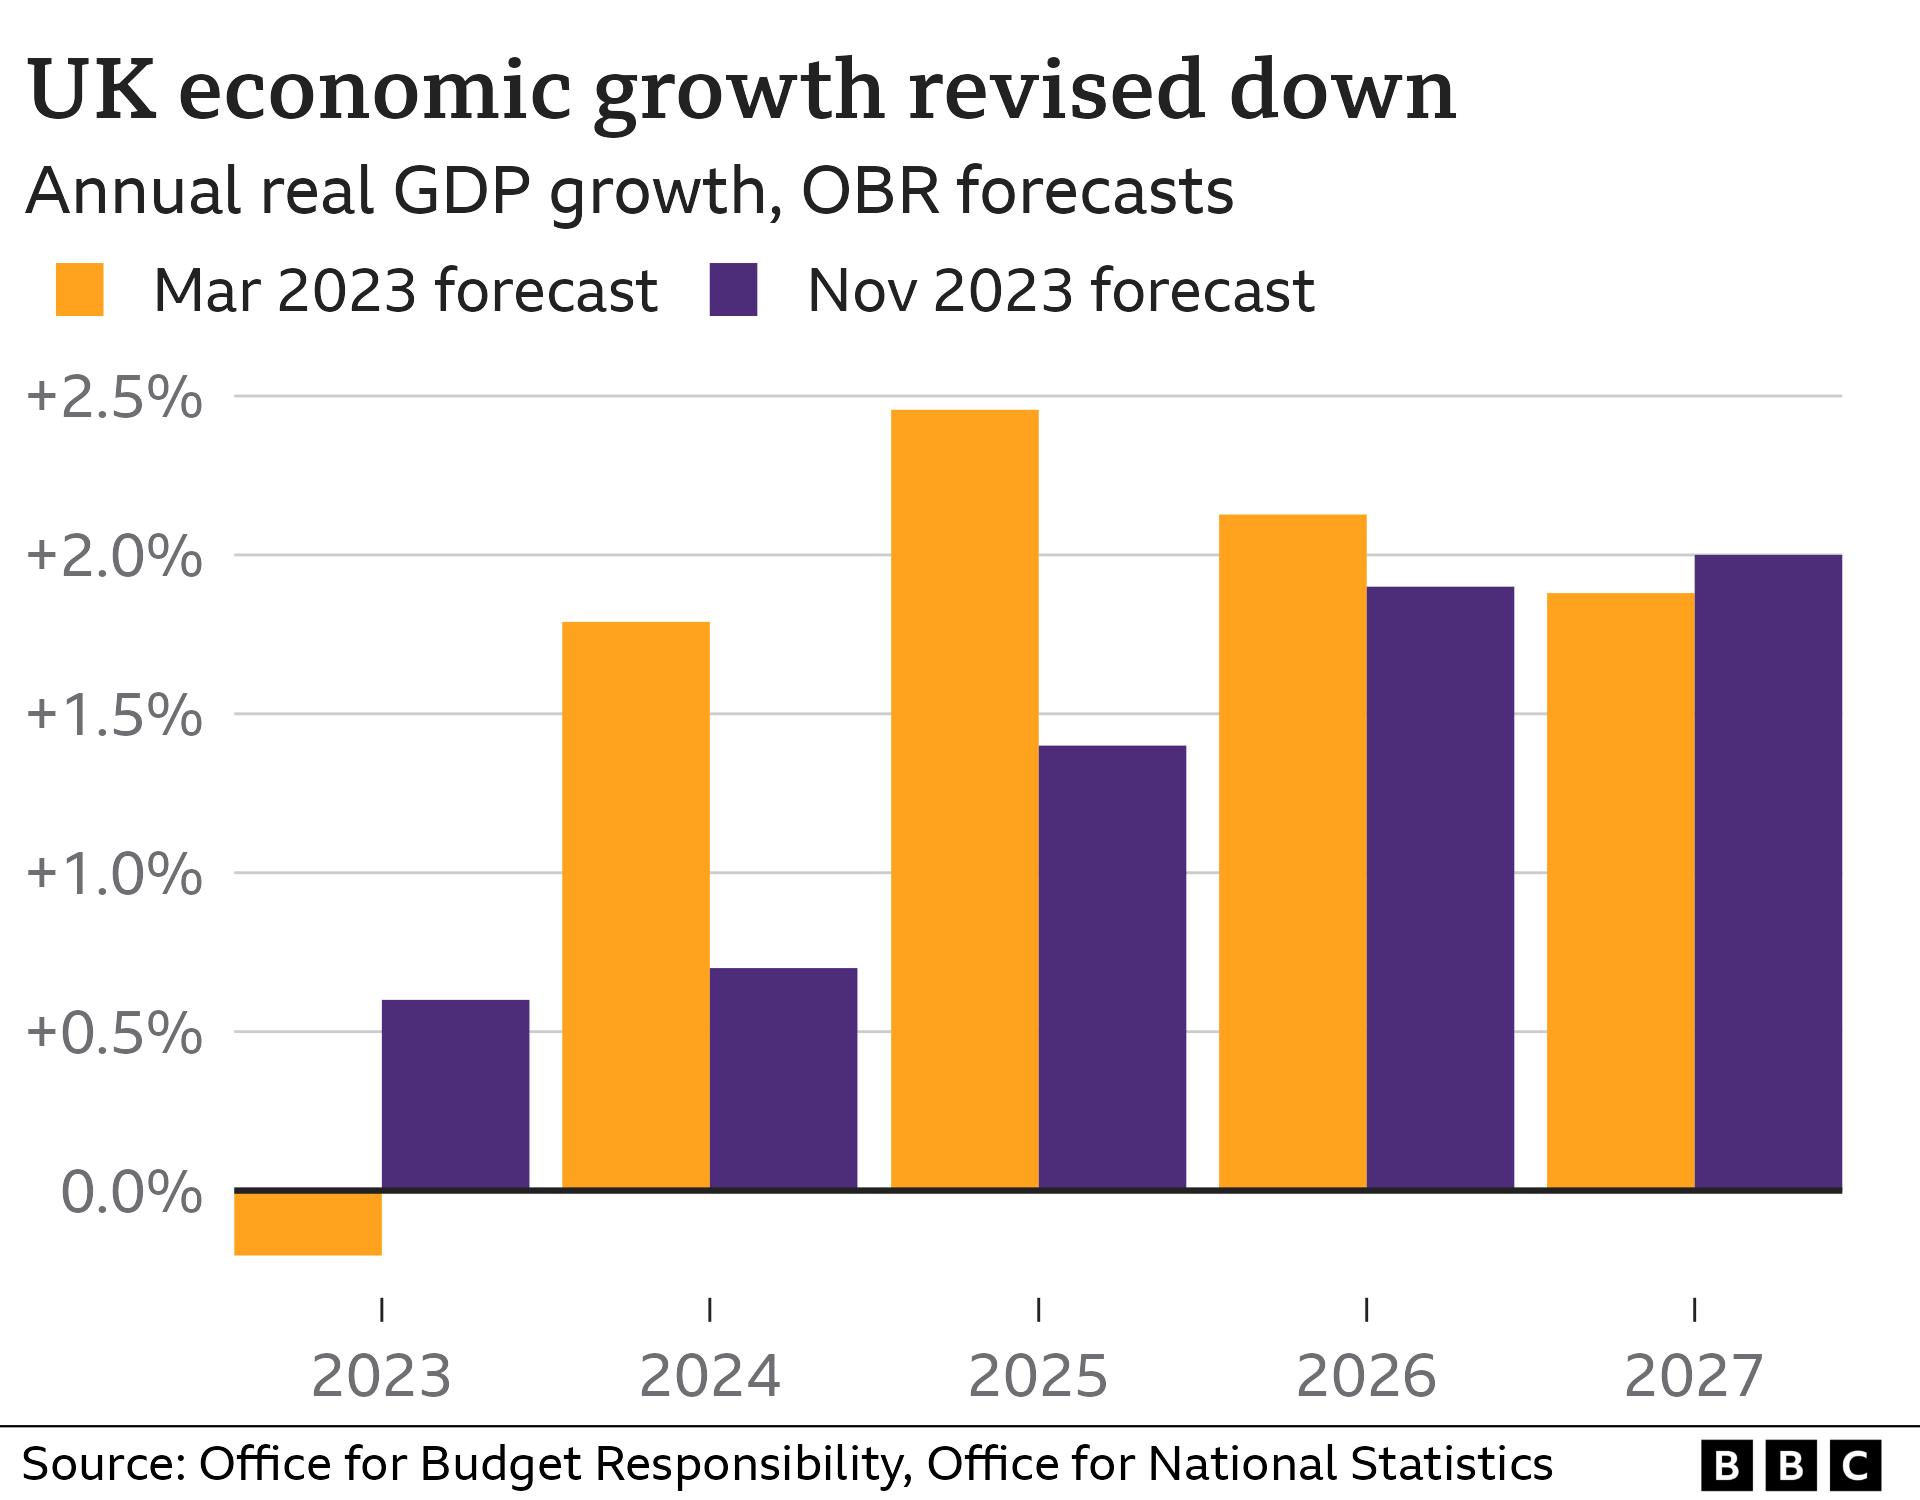 GDP growth chart